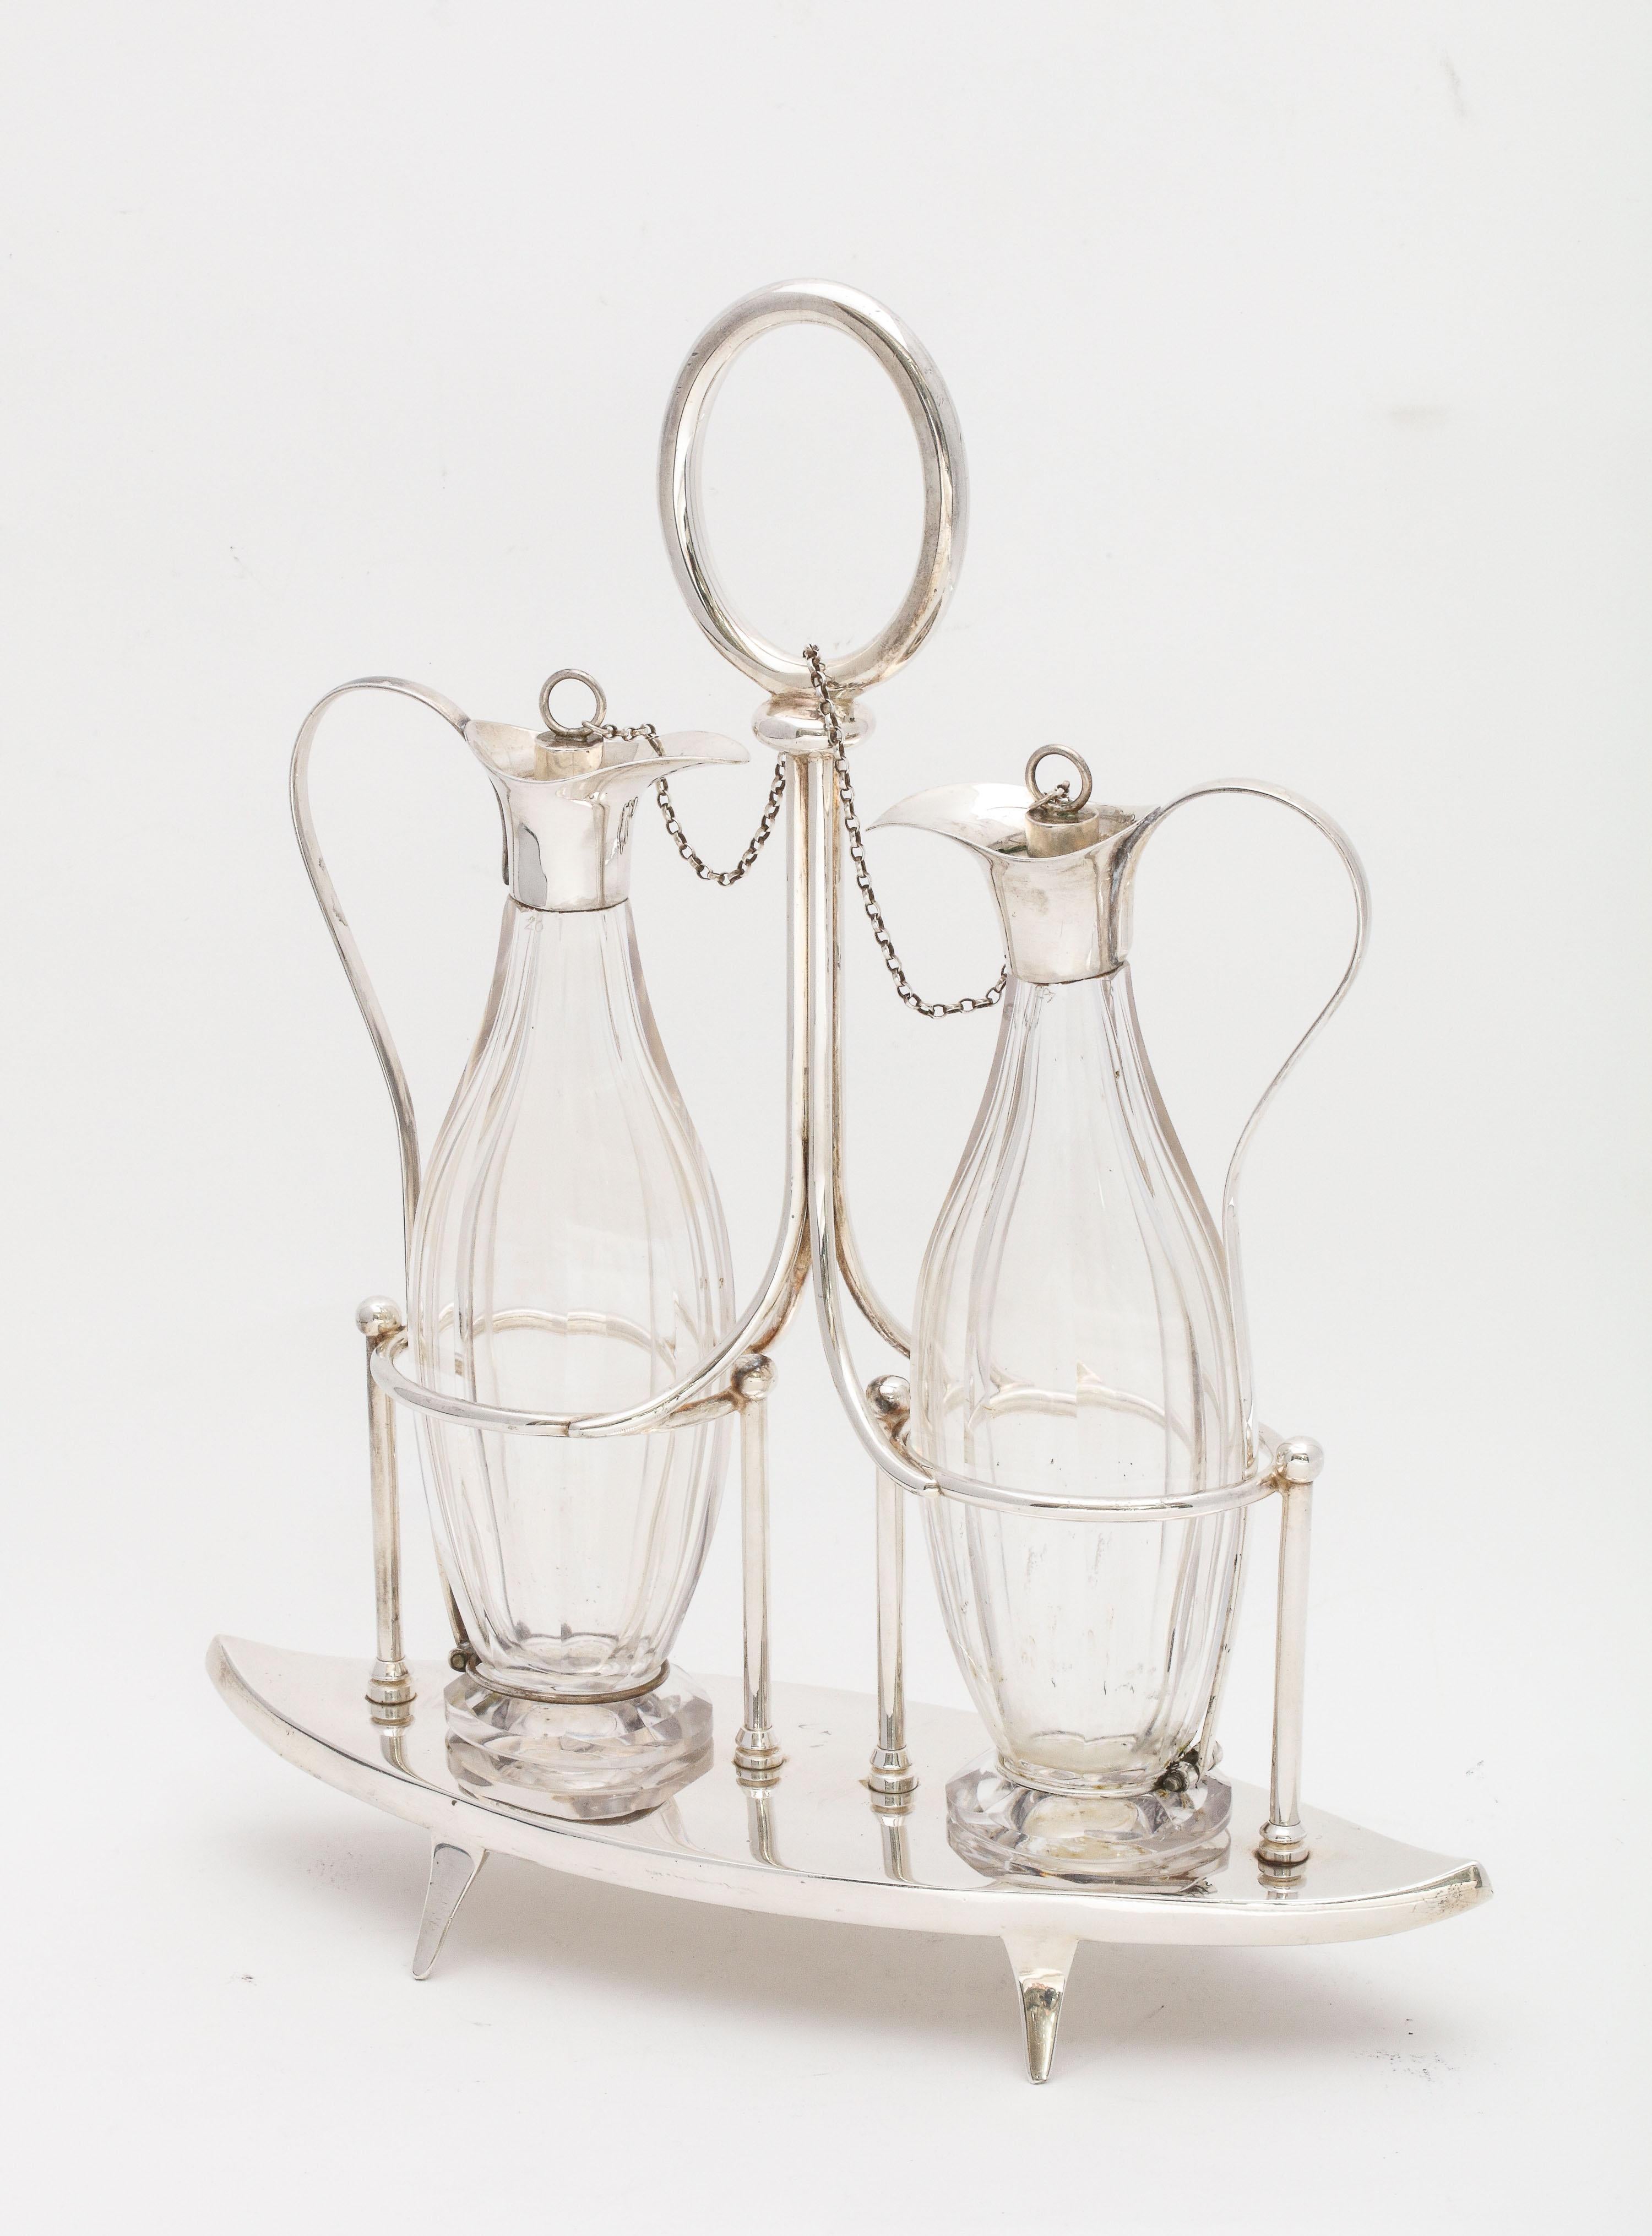 Victorian, Sheffield plated, footed, two bottle cruet set (consisting of the two bottles, stoppers and stand), Sheffield, England, circa 1878, William Hutton and Sons - makers. Stand measures: 10 1/8 inches high (to top of handle) x 8 1/2 inches